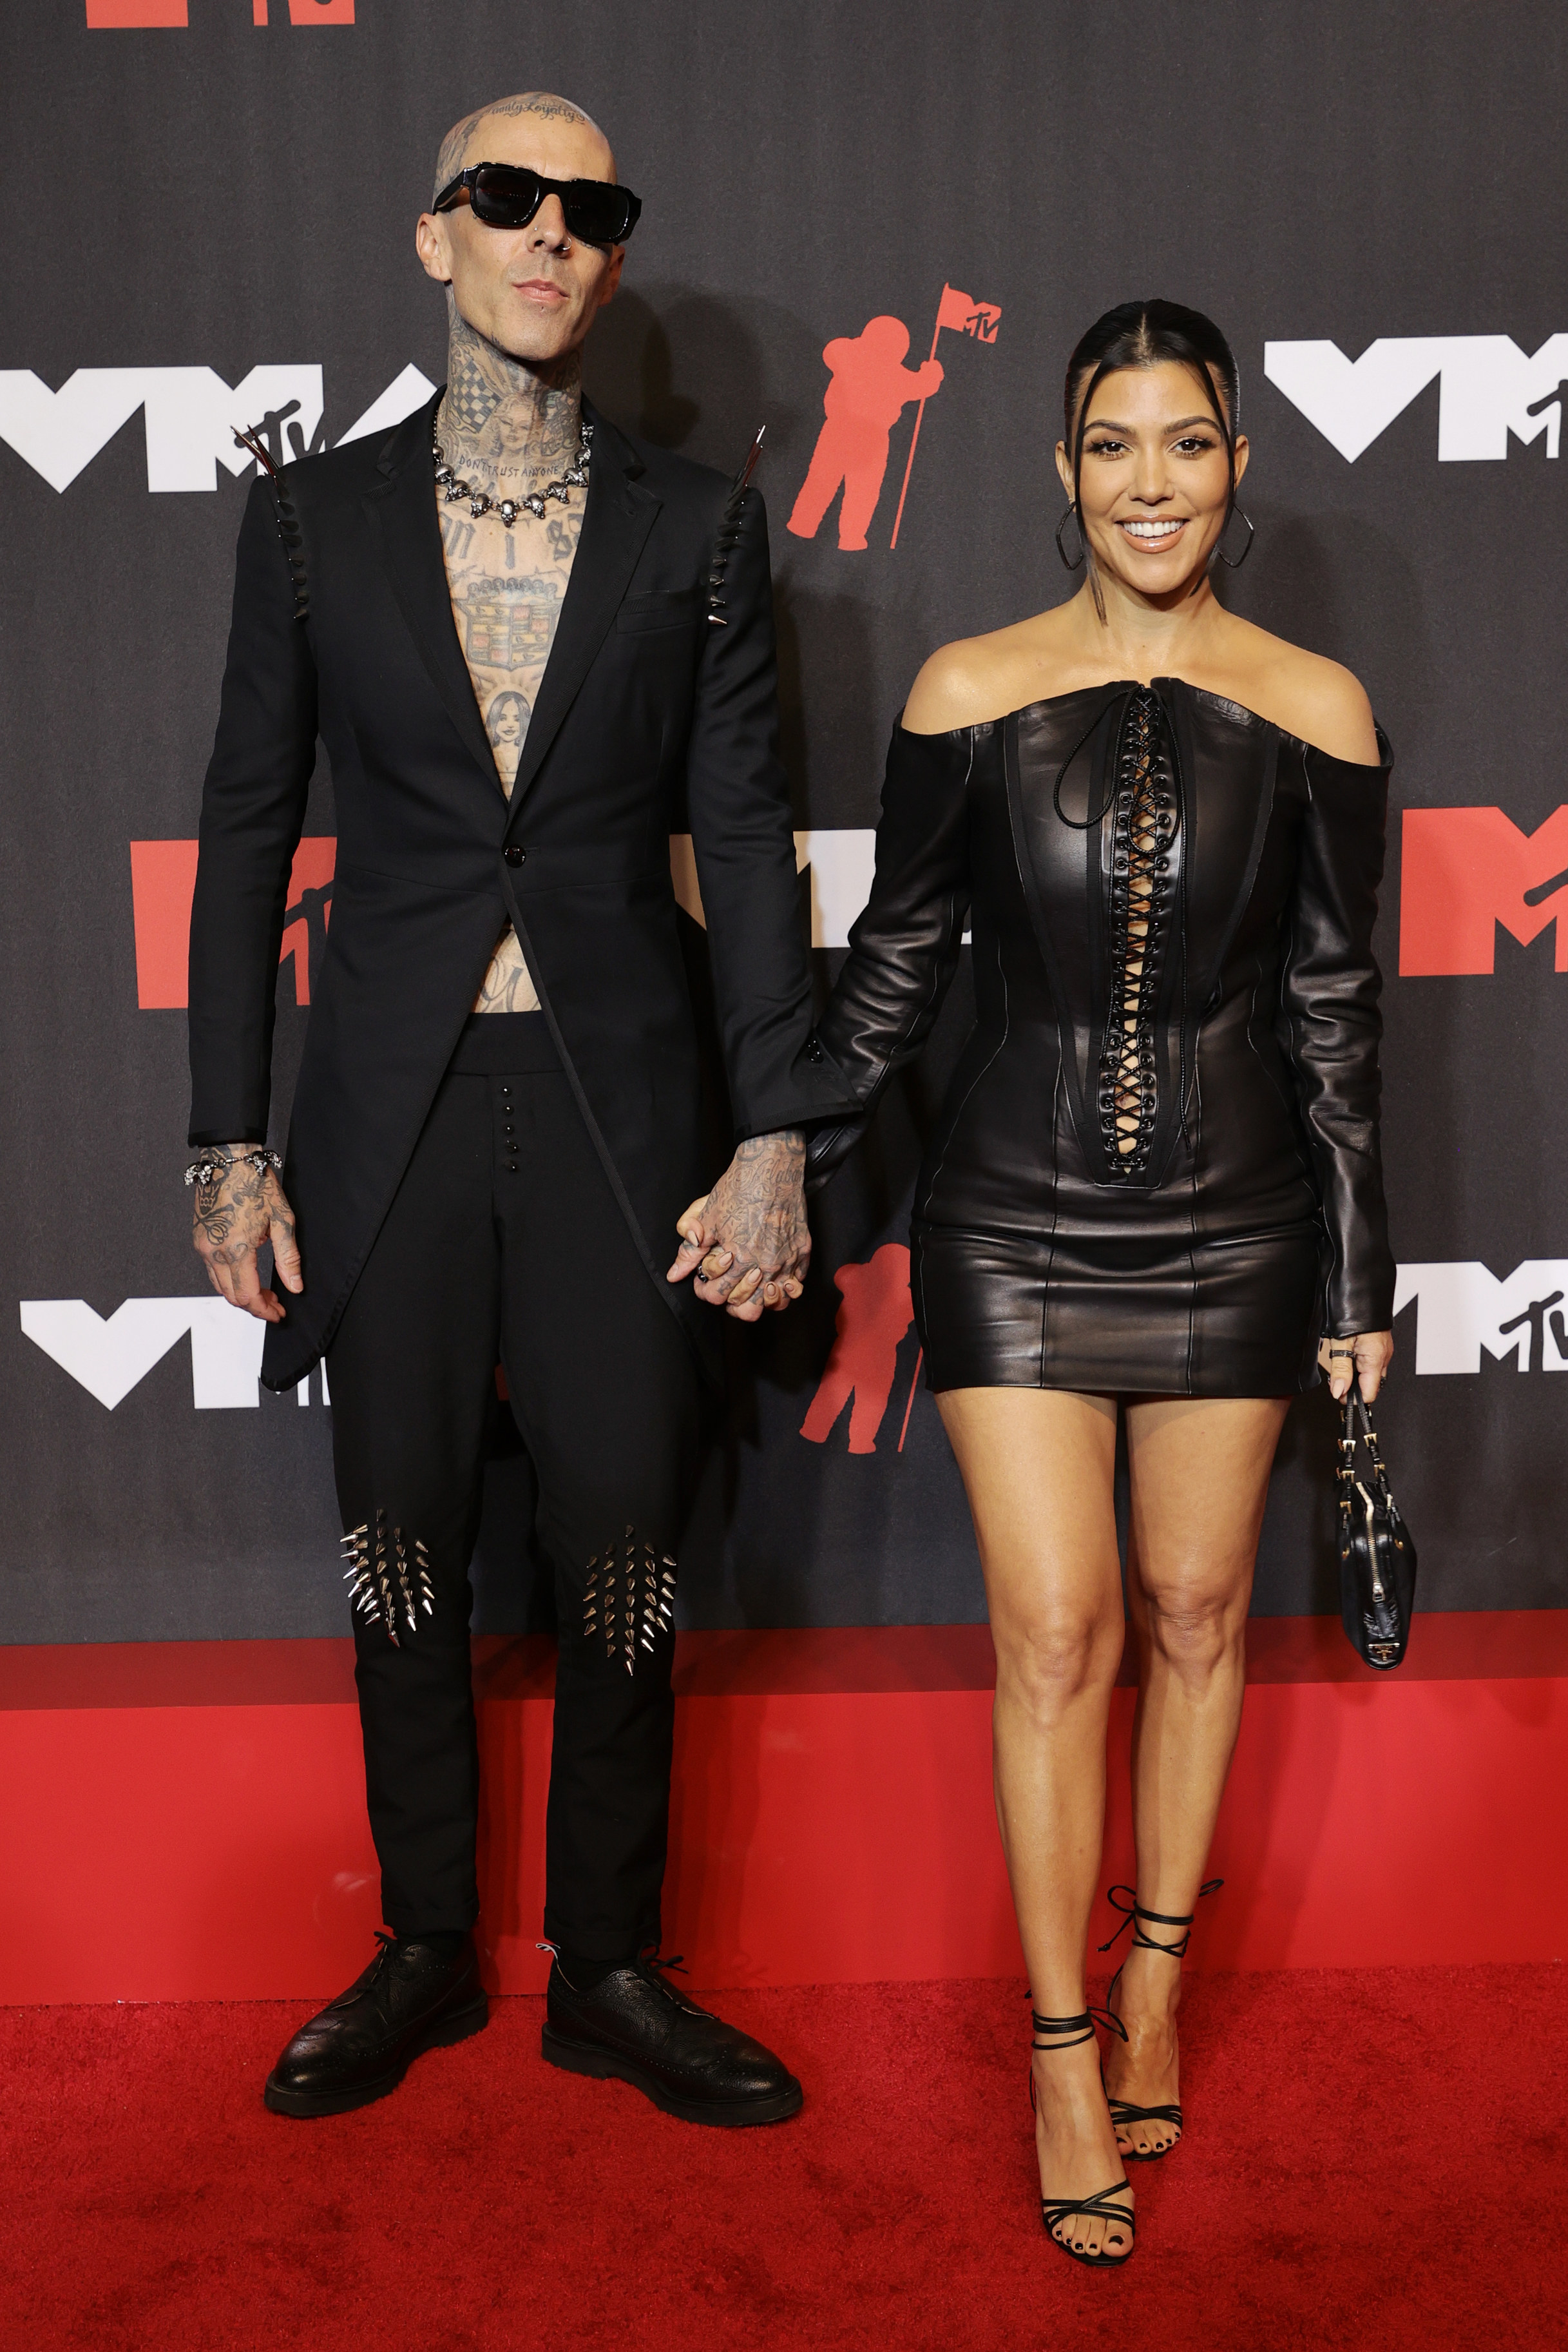 Kardashian and Barker at the MTV Video Music Awards in 2021